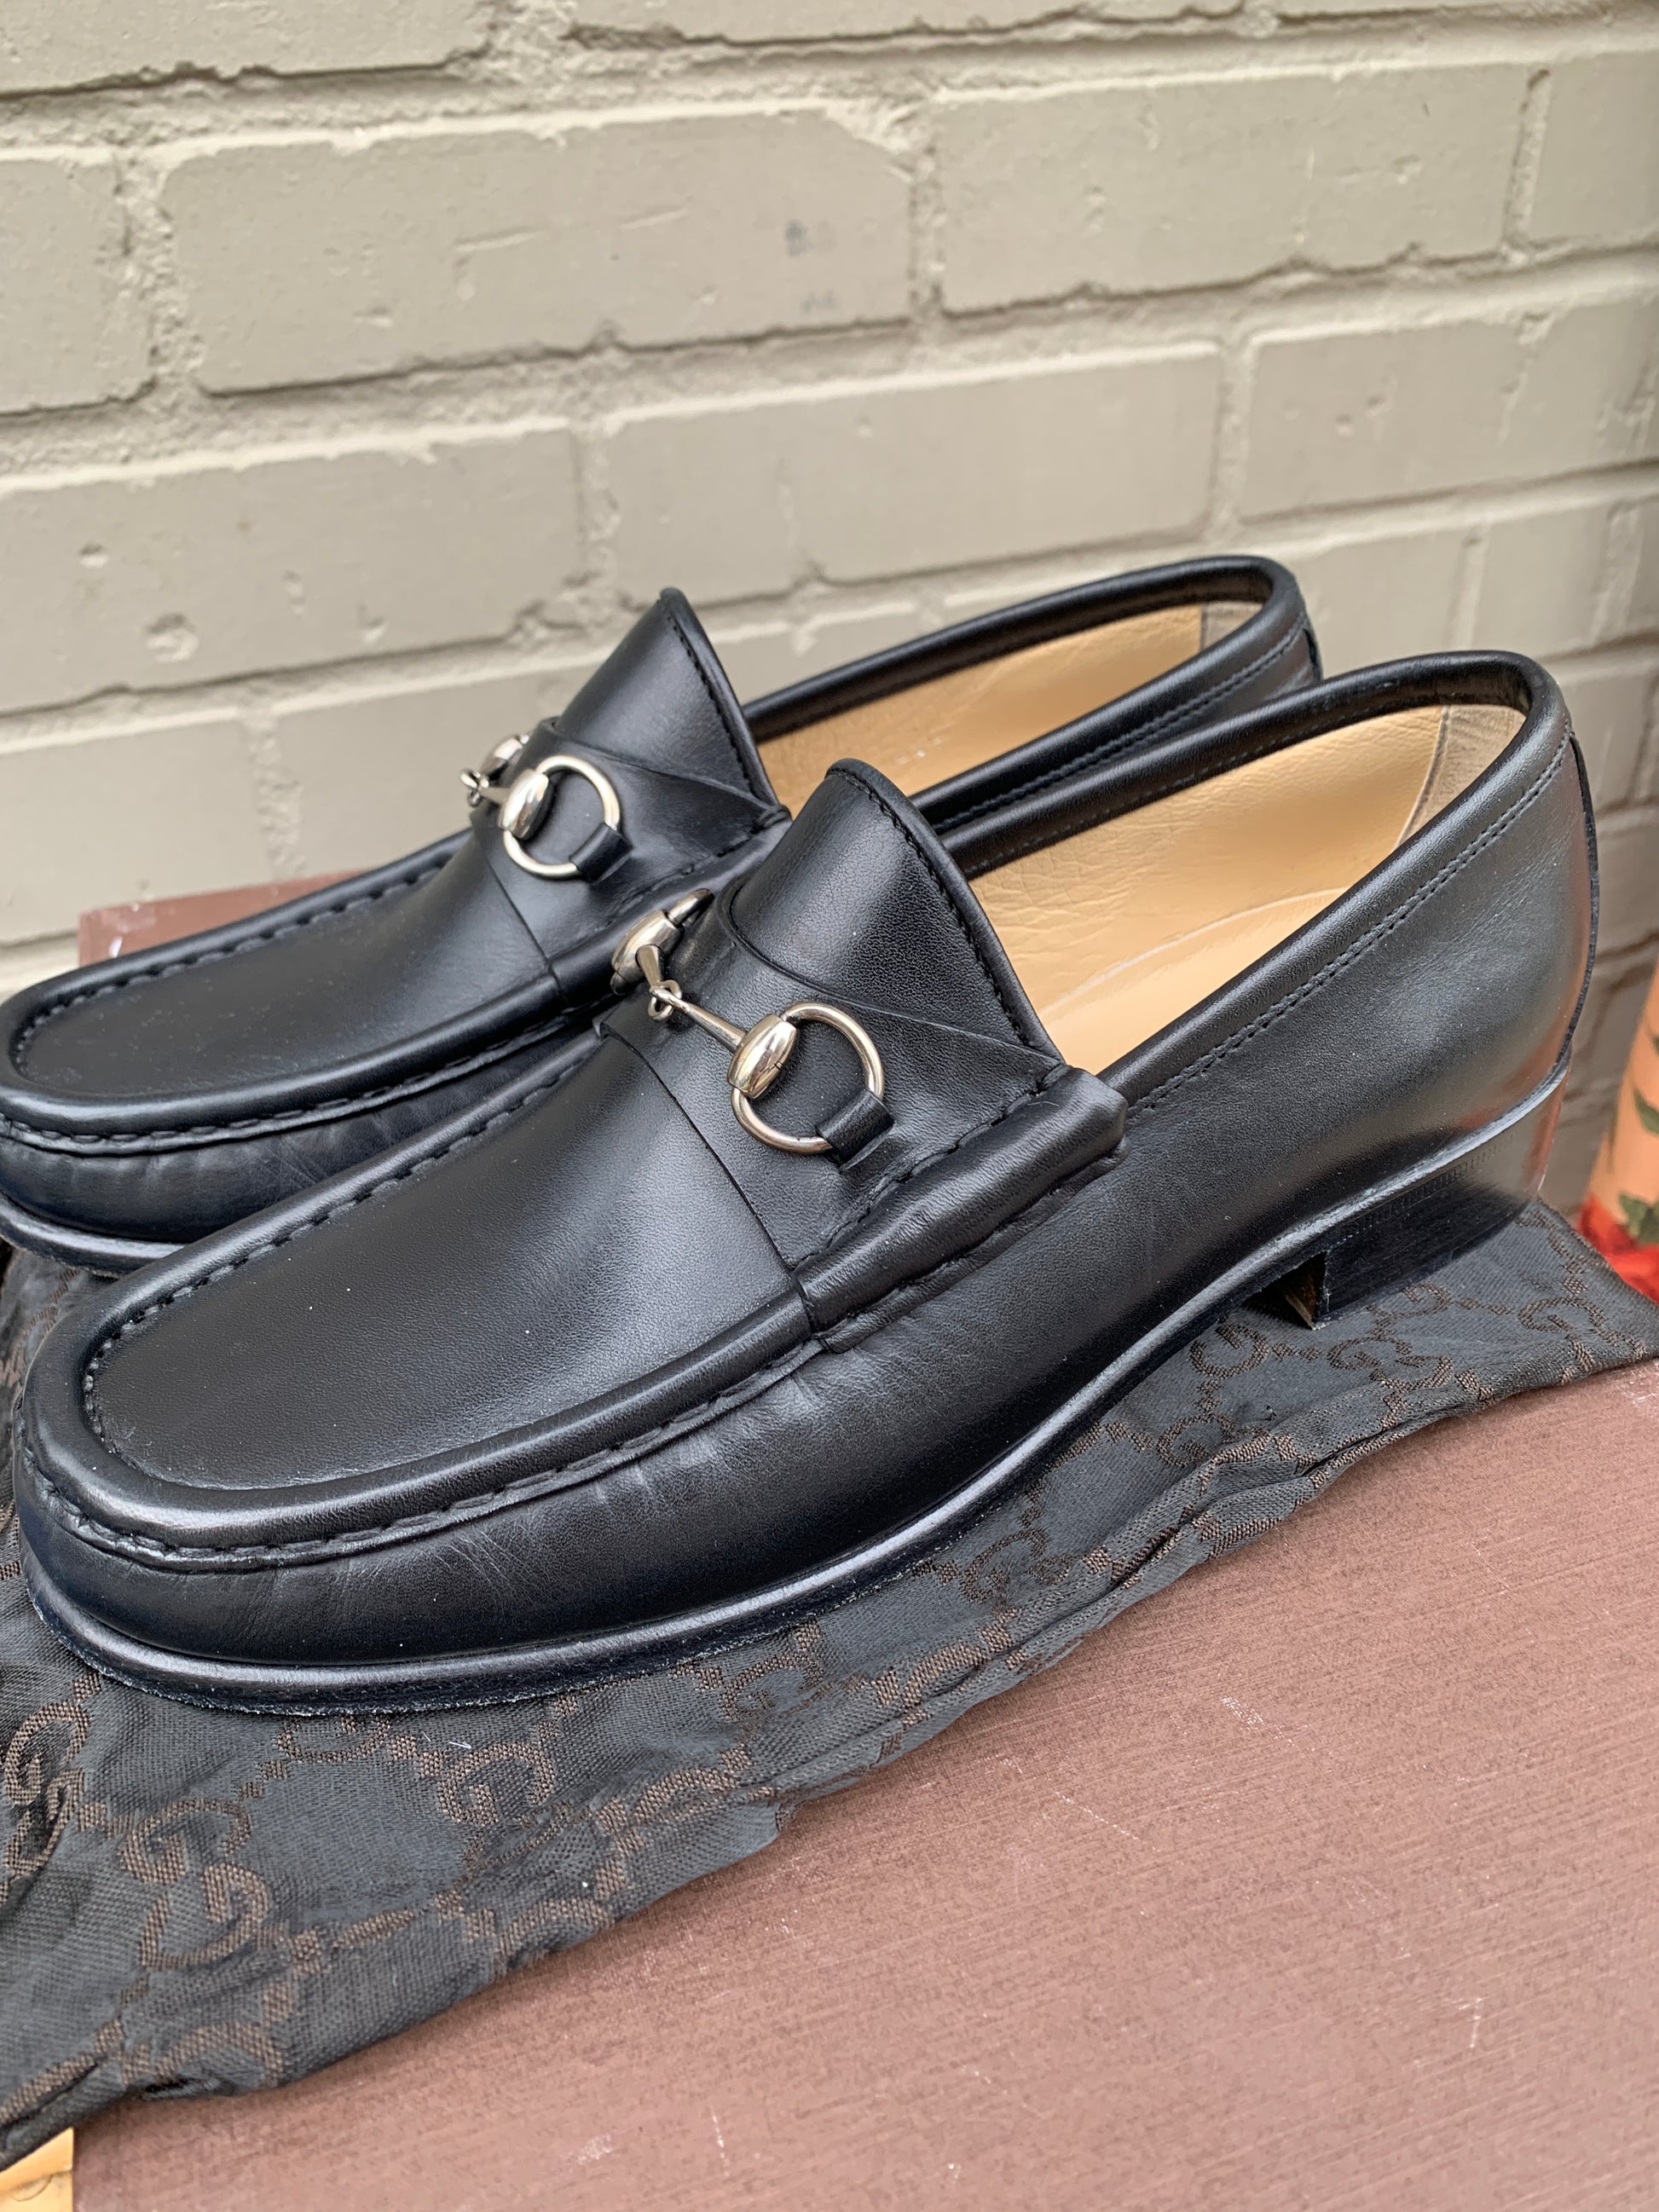 NWB Gucci Mens Shoes Leather GG Guccissima Boat shoes Loafer Sneaker sz 7/  us7.5